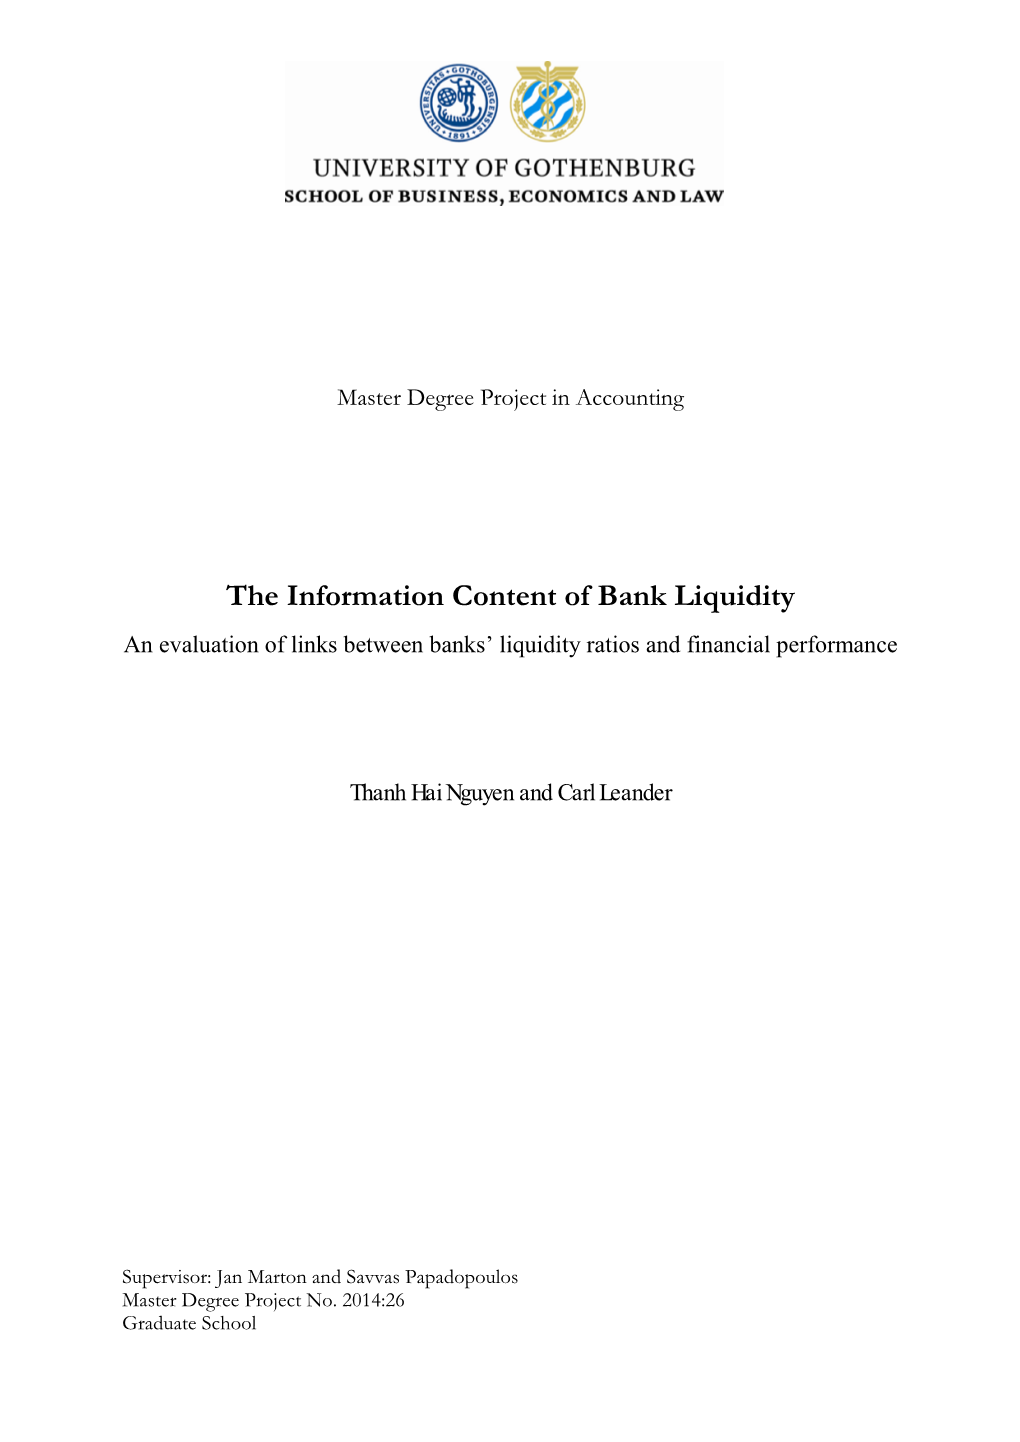 The Information Content of Bank Liquidity an Evaluation of Links Between Banks’ Liquidity Ratios and Financial Performance